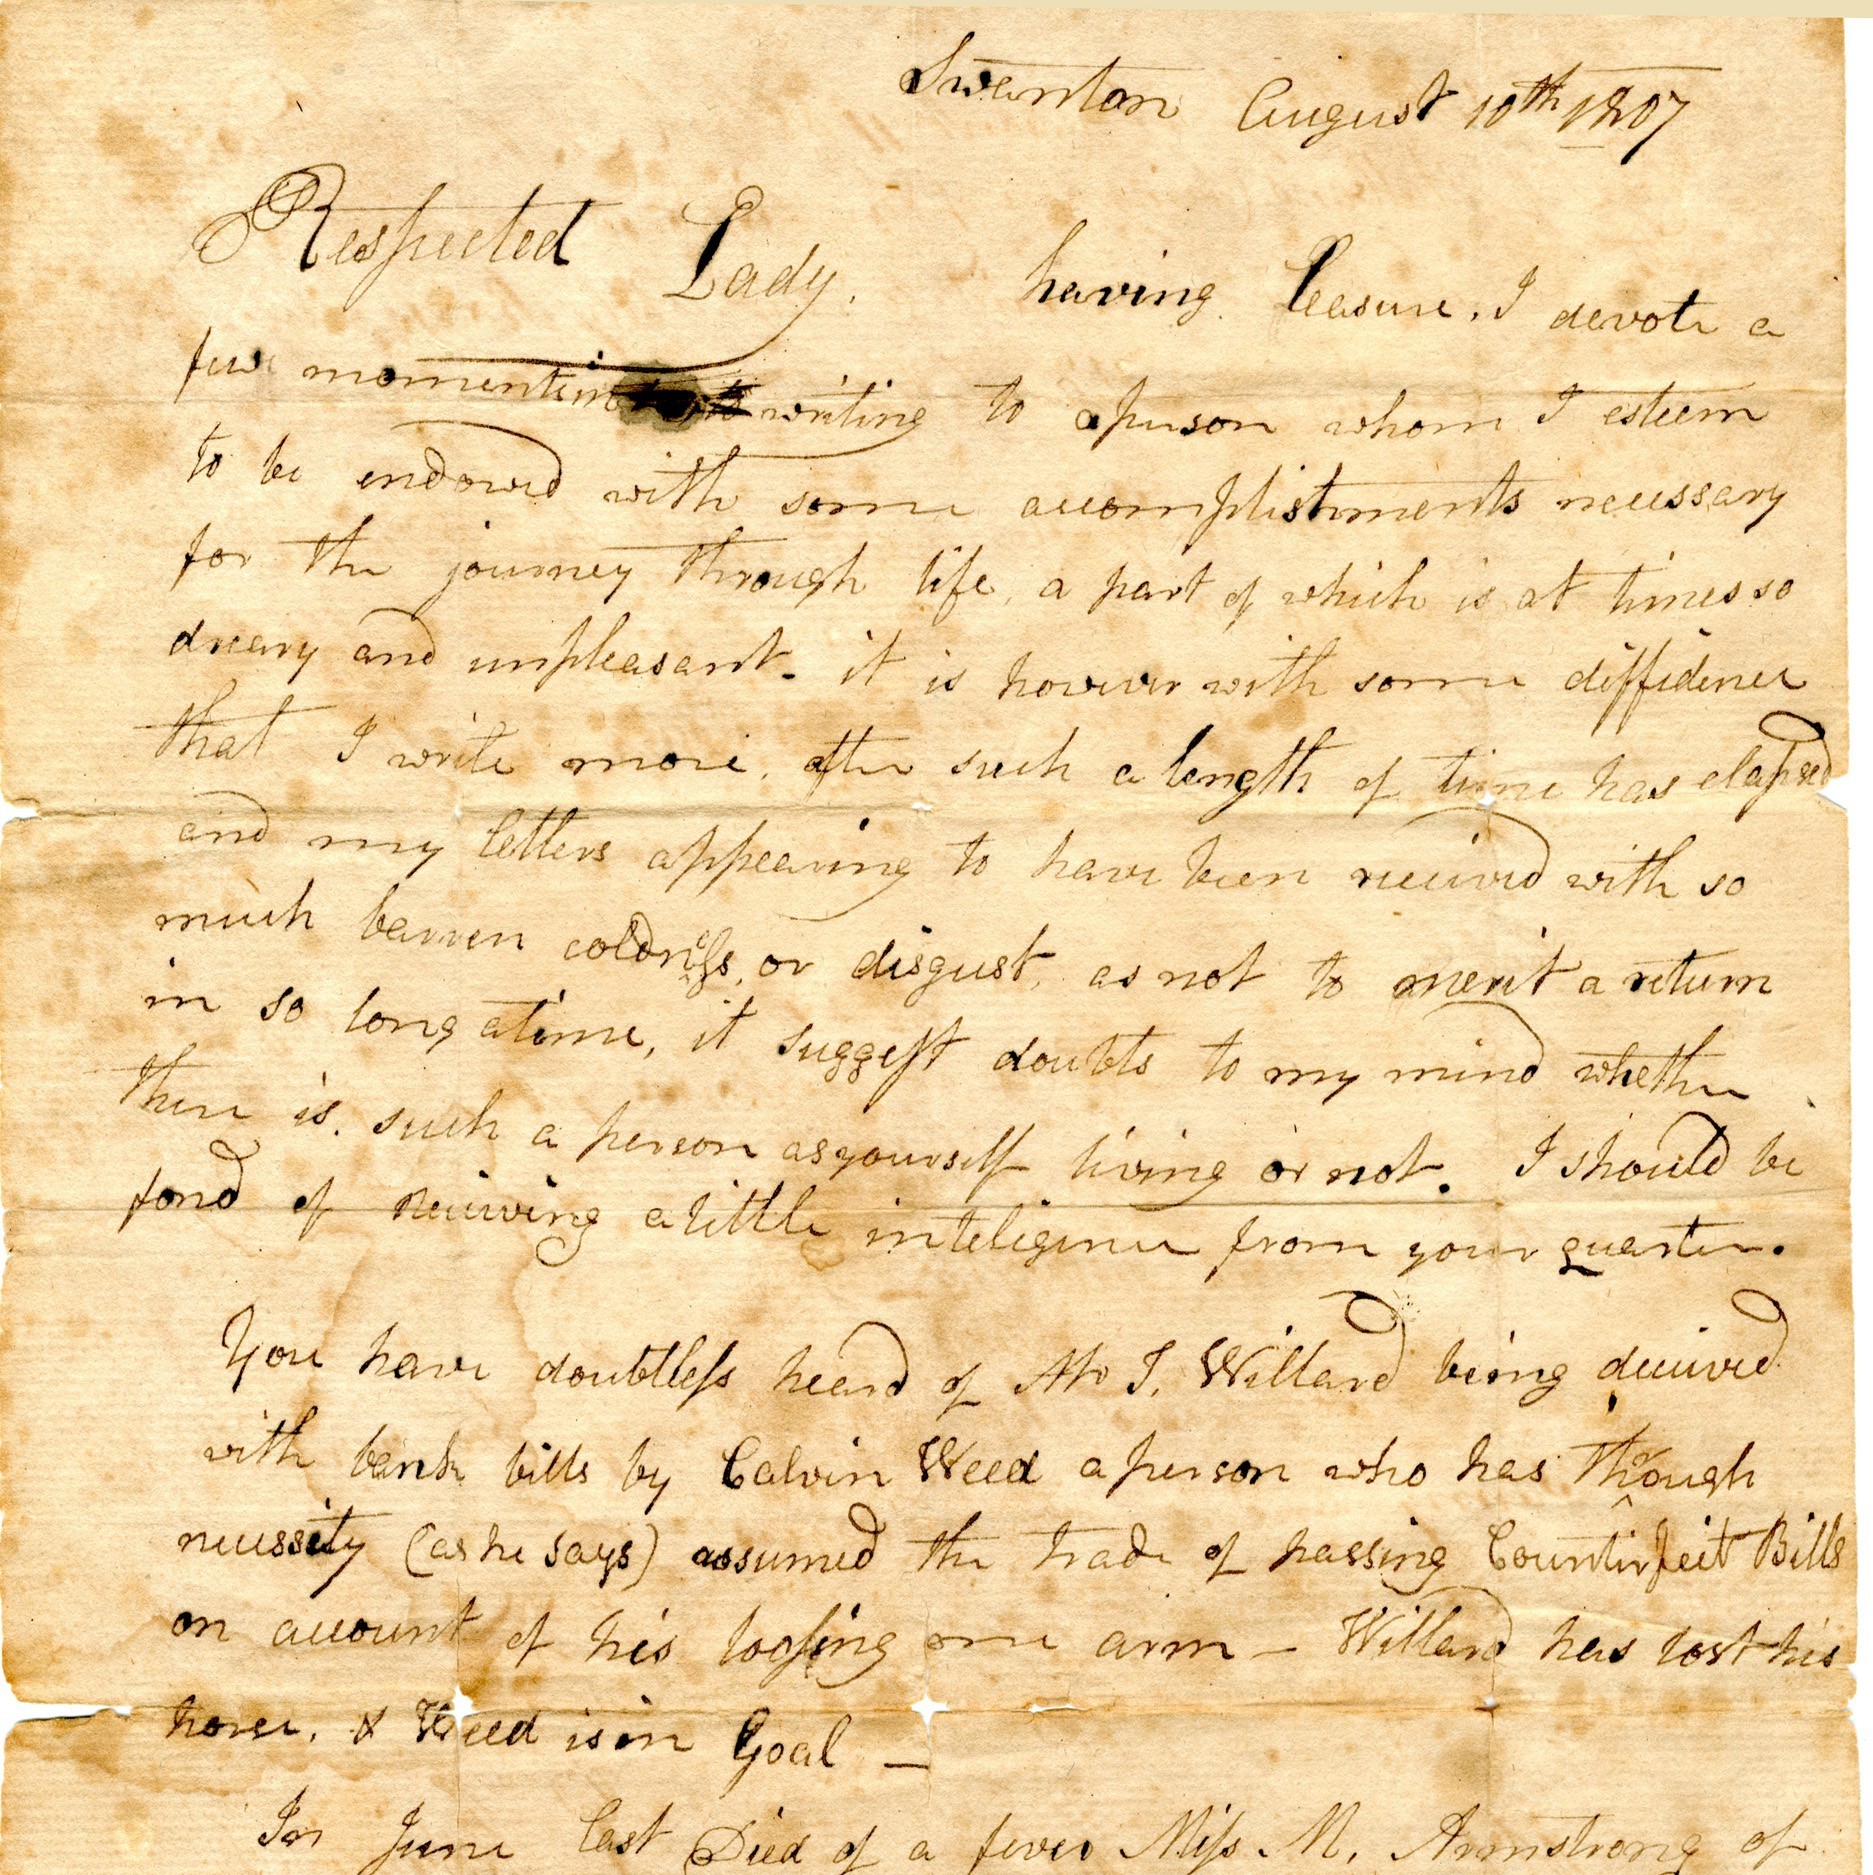 Scan of an early manuscript